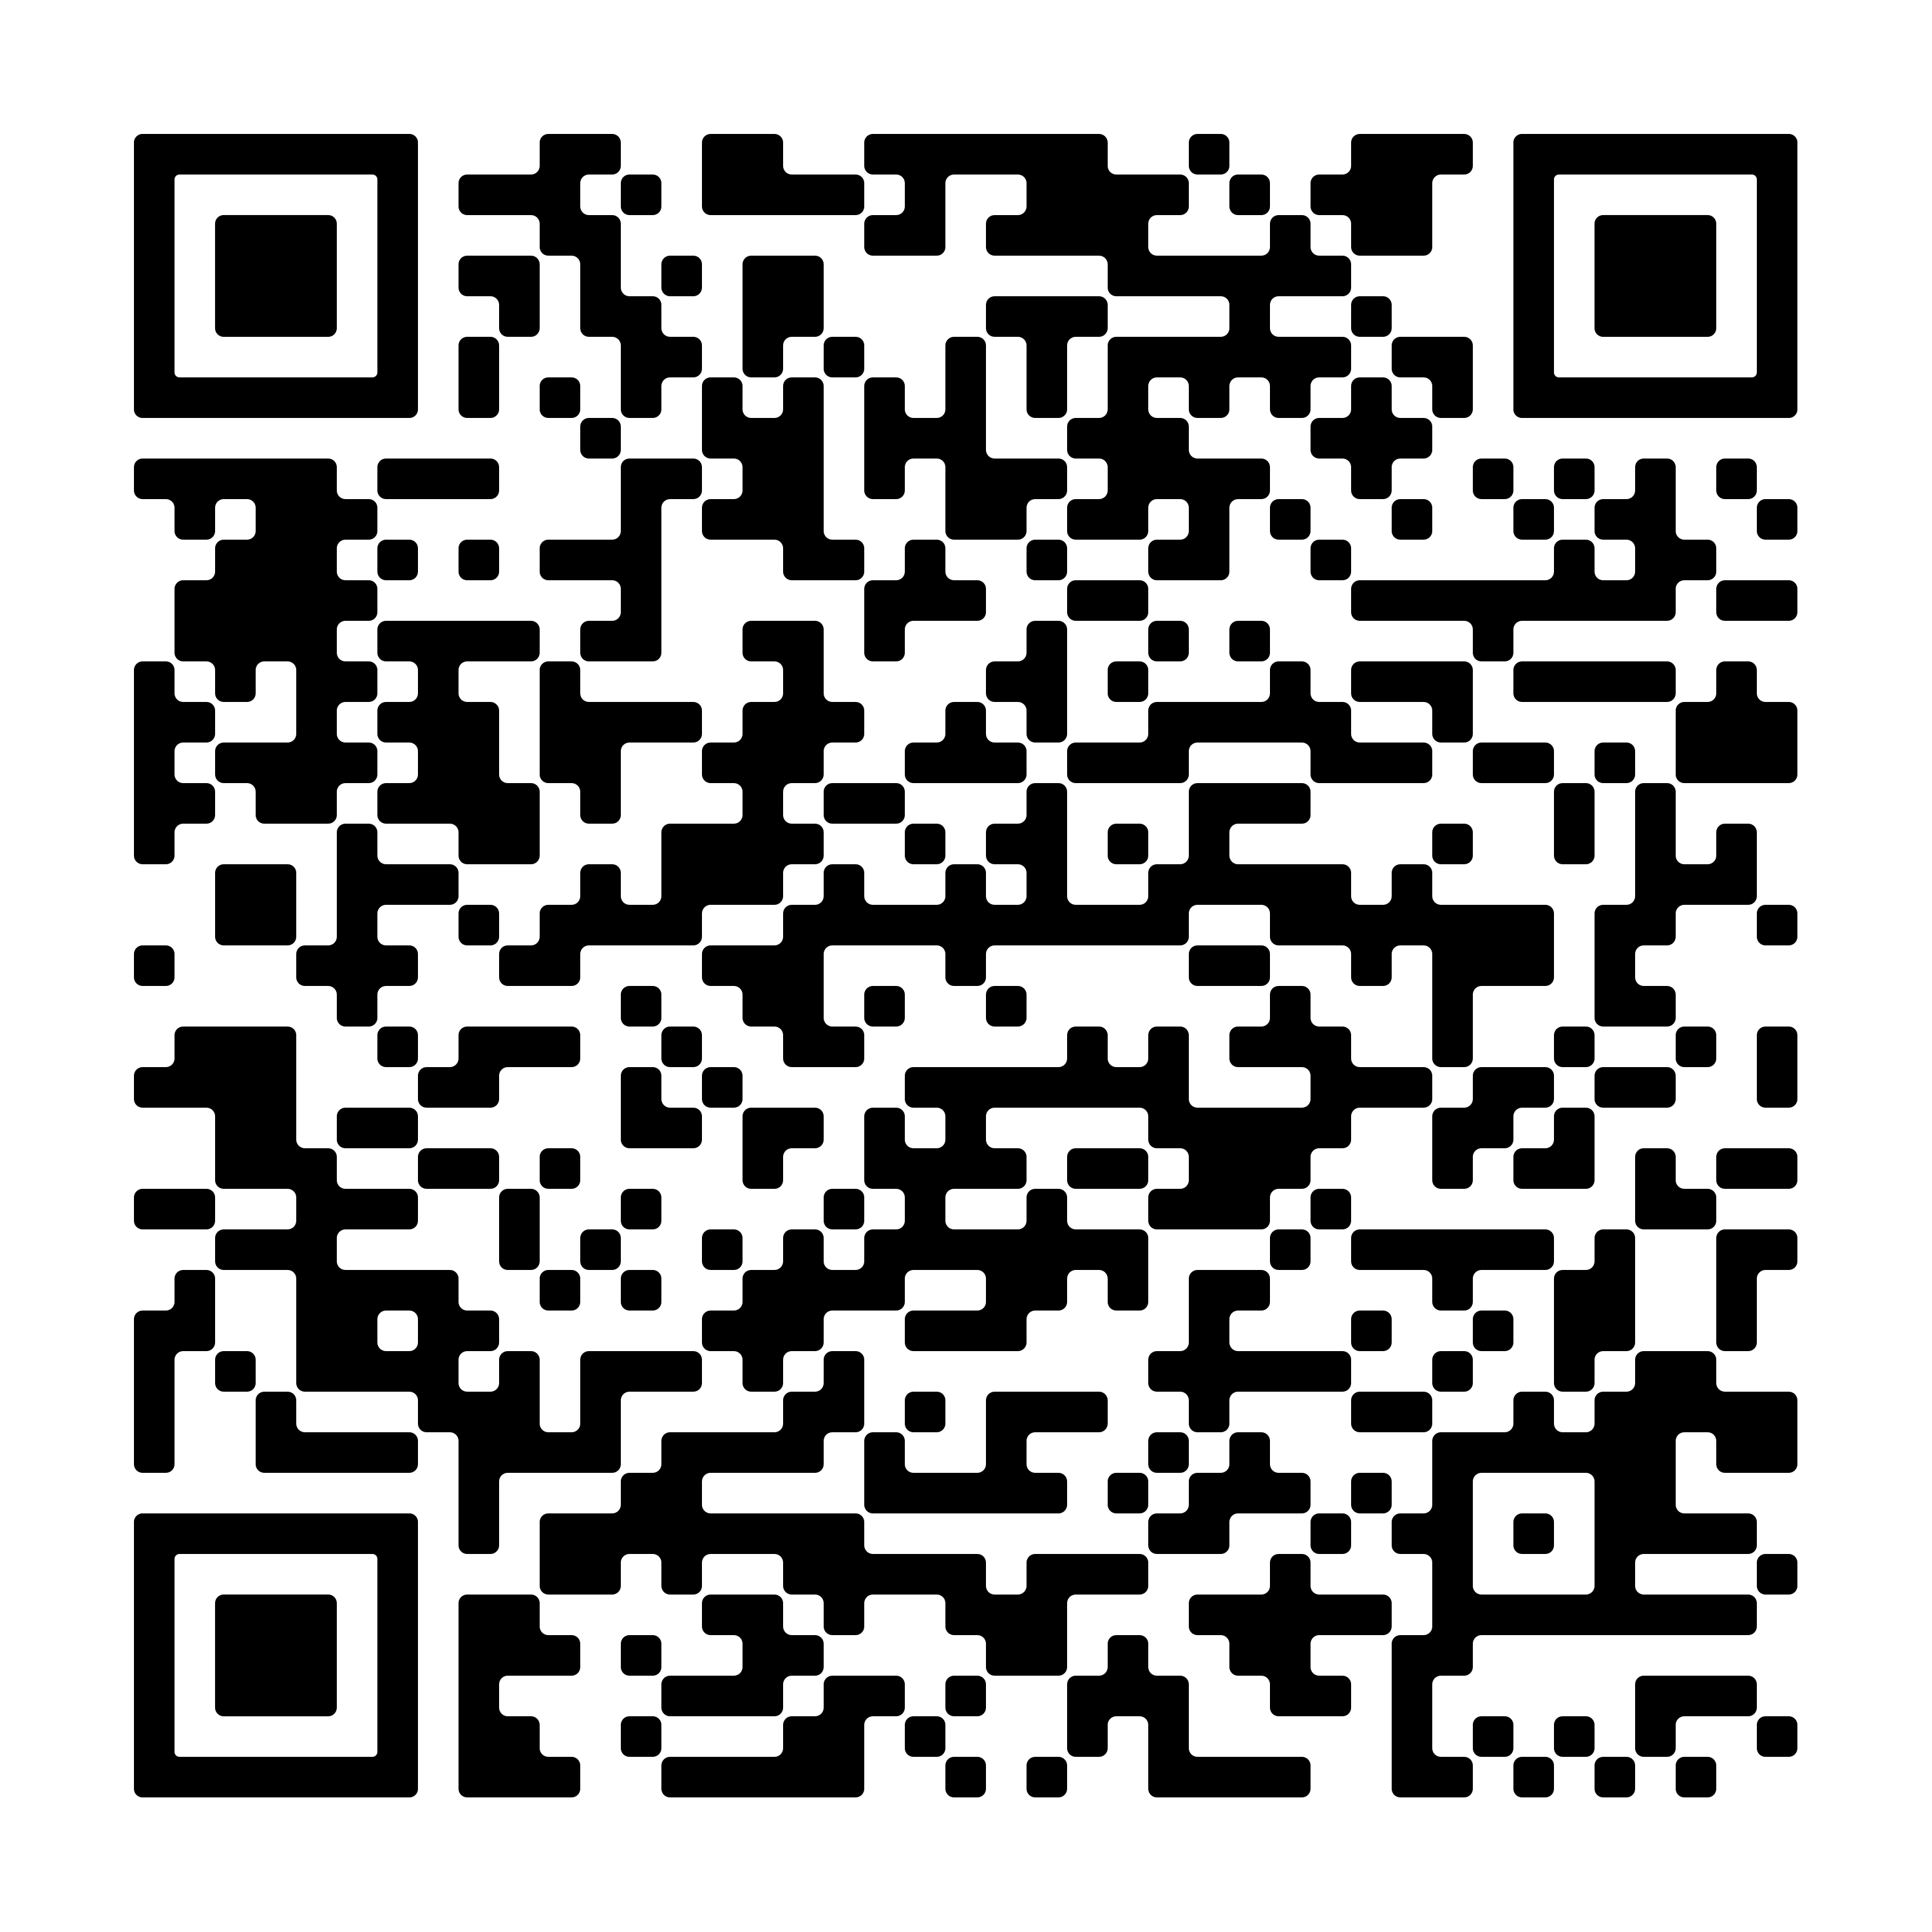 QR code to go to the Solidarity Fund